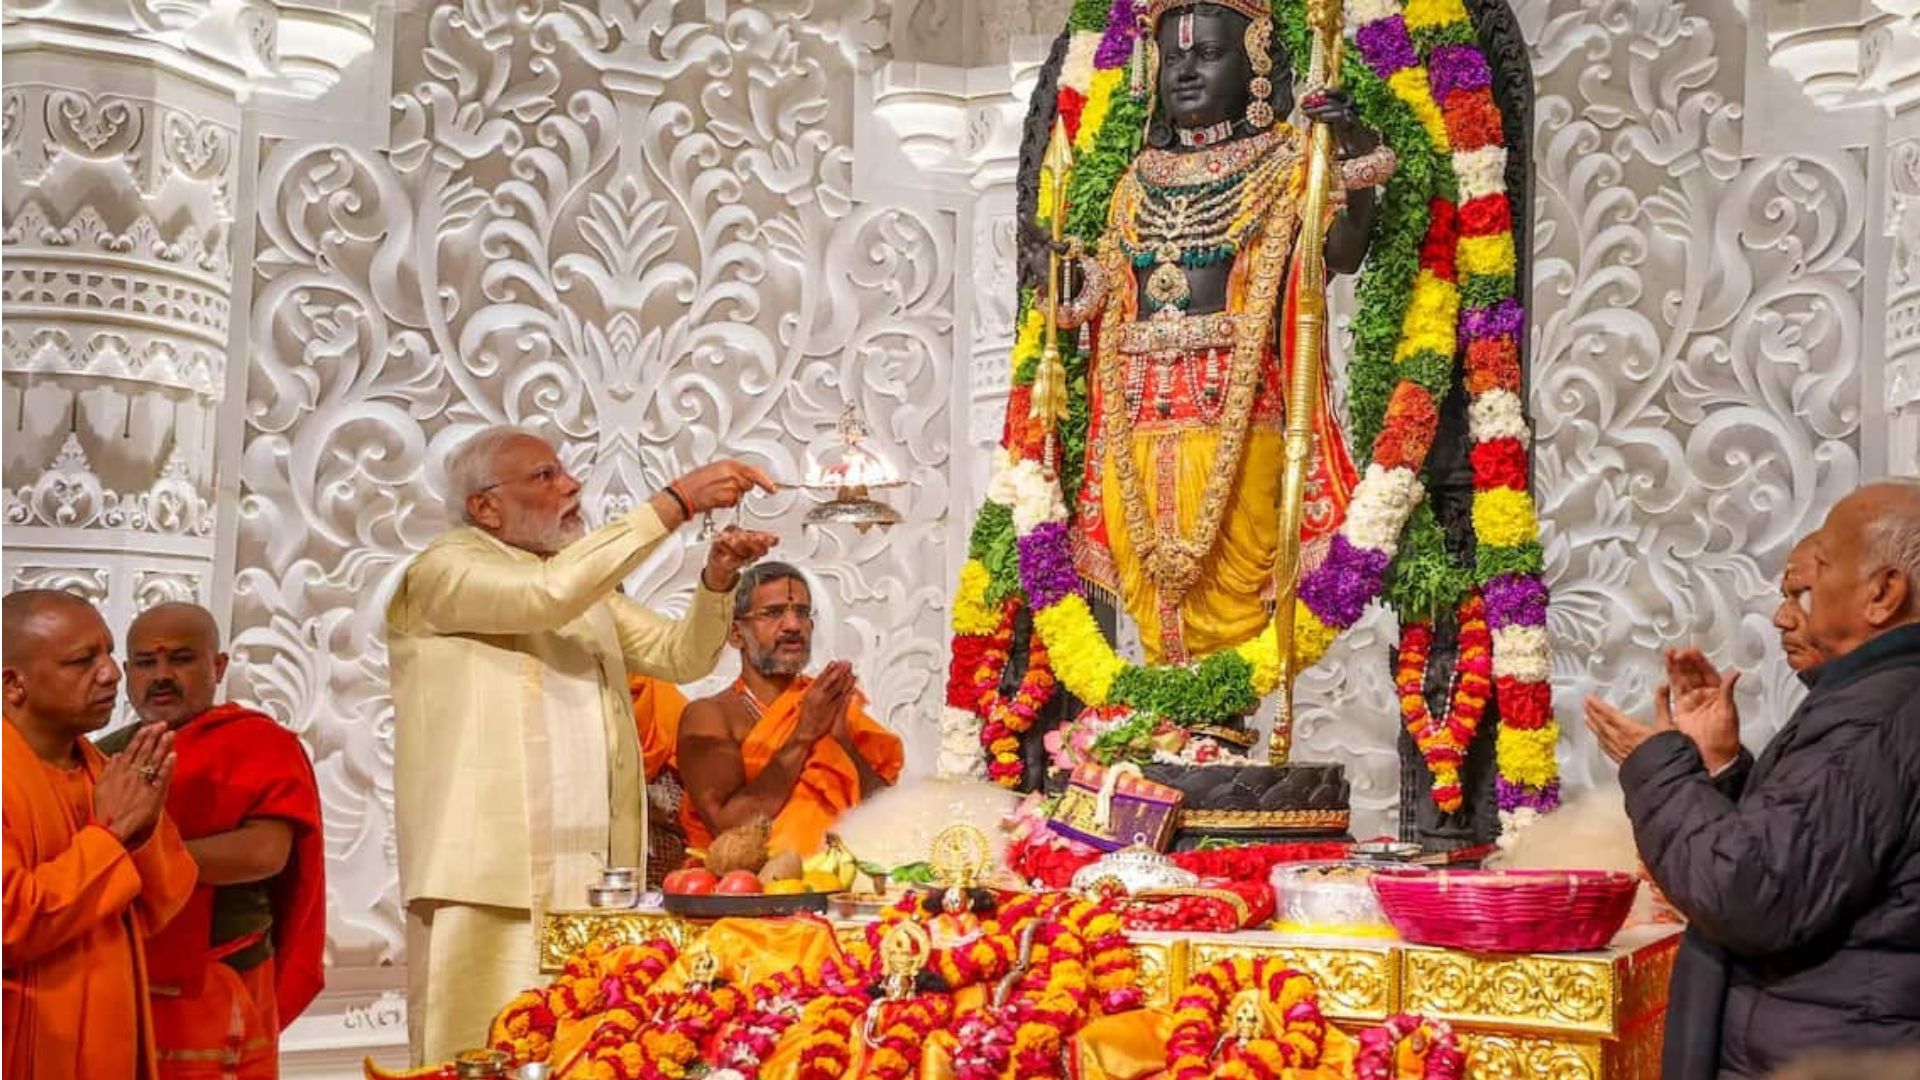 Ram Lalla idol: Know how much gold, diamond used at Ram Temple